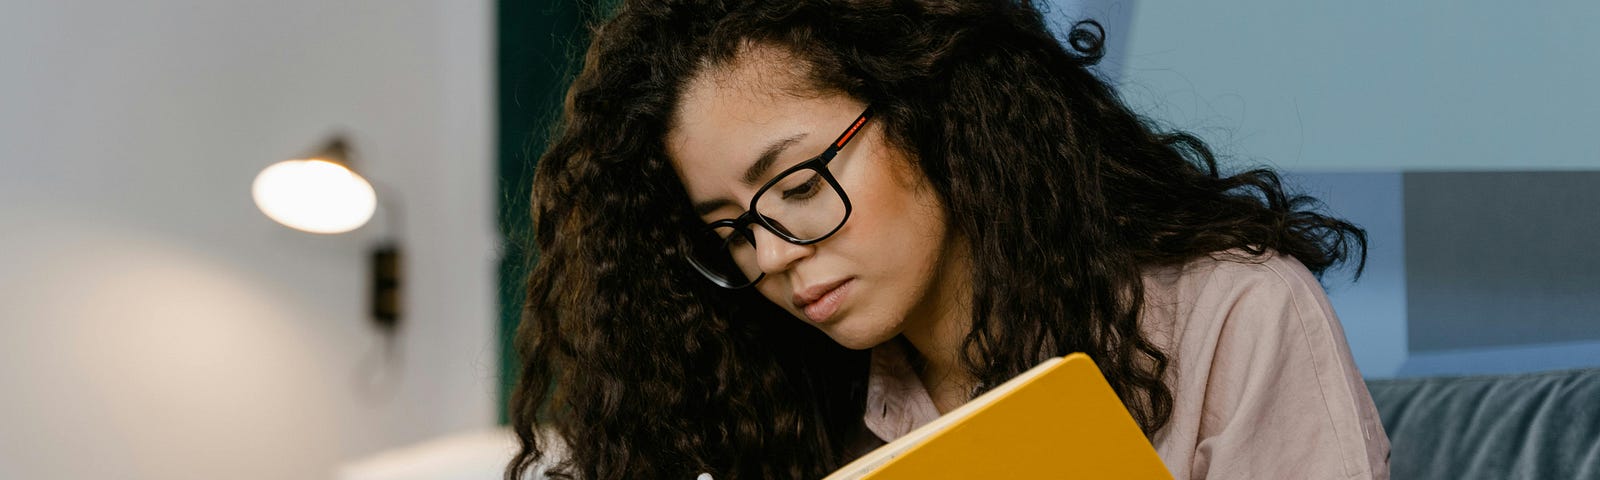 Woman with glasses and curly brown hair sitting on a couch writing in a yellow journal or notebook